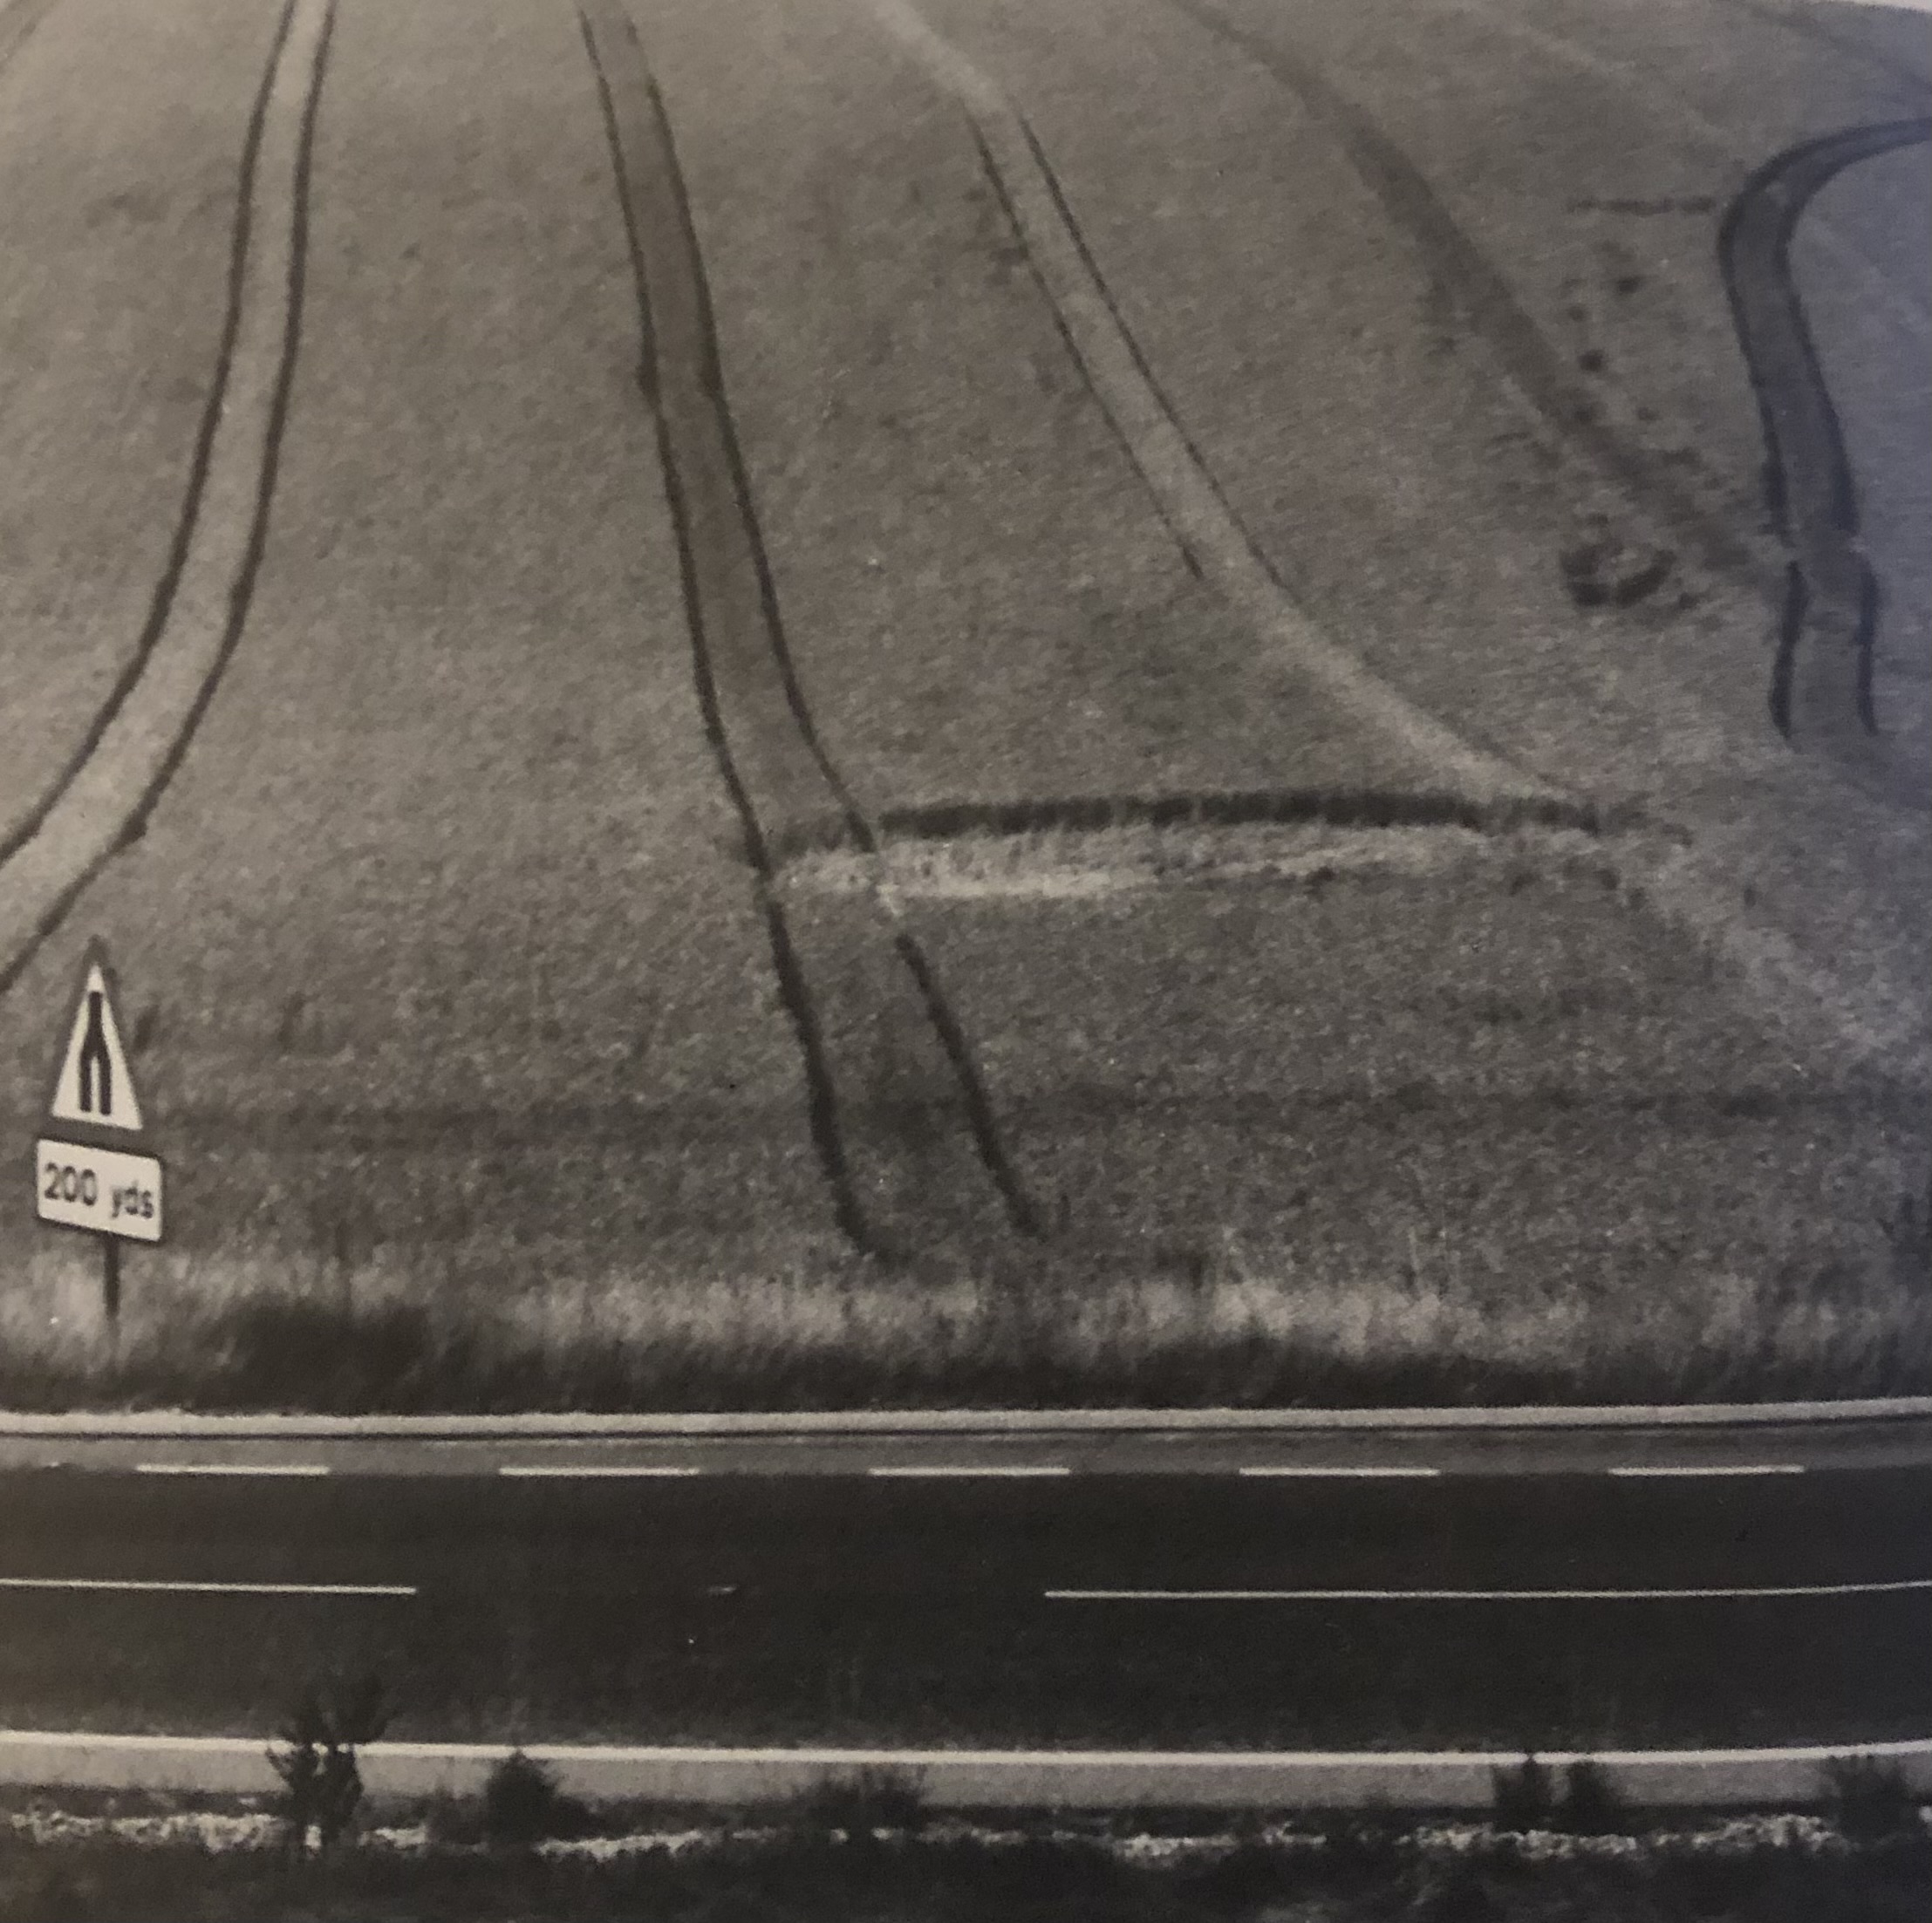 A black and white side-aerial photograph where the ellipse of a crop circle can be seen in a field beyond a paved road and road sign at the bottom of the frame. Parallel lines follow the topography of the field down from the top of the frame to meet the grass that lines the road.